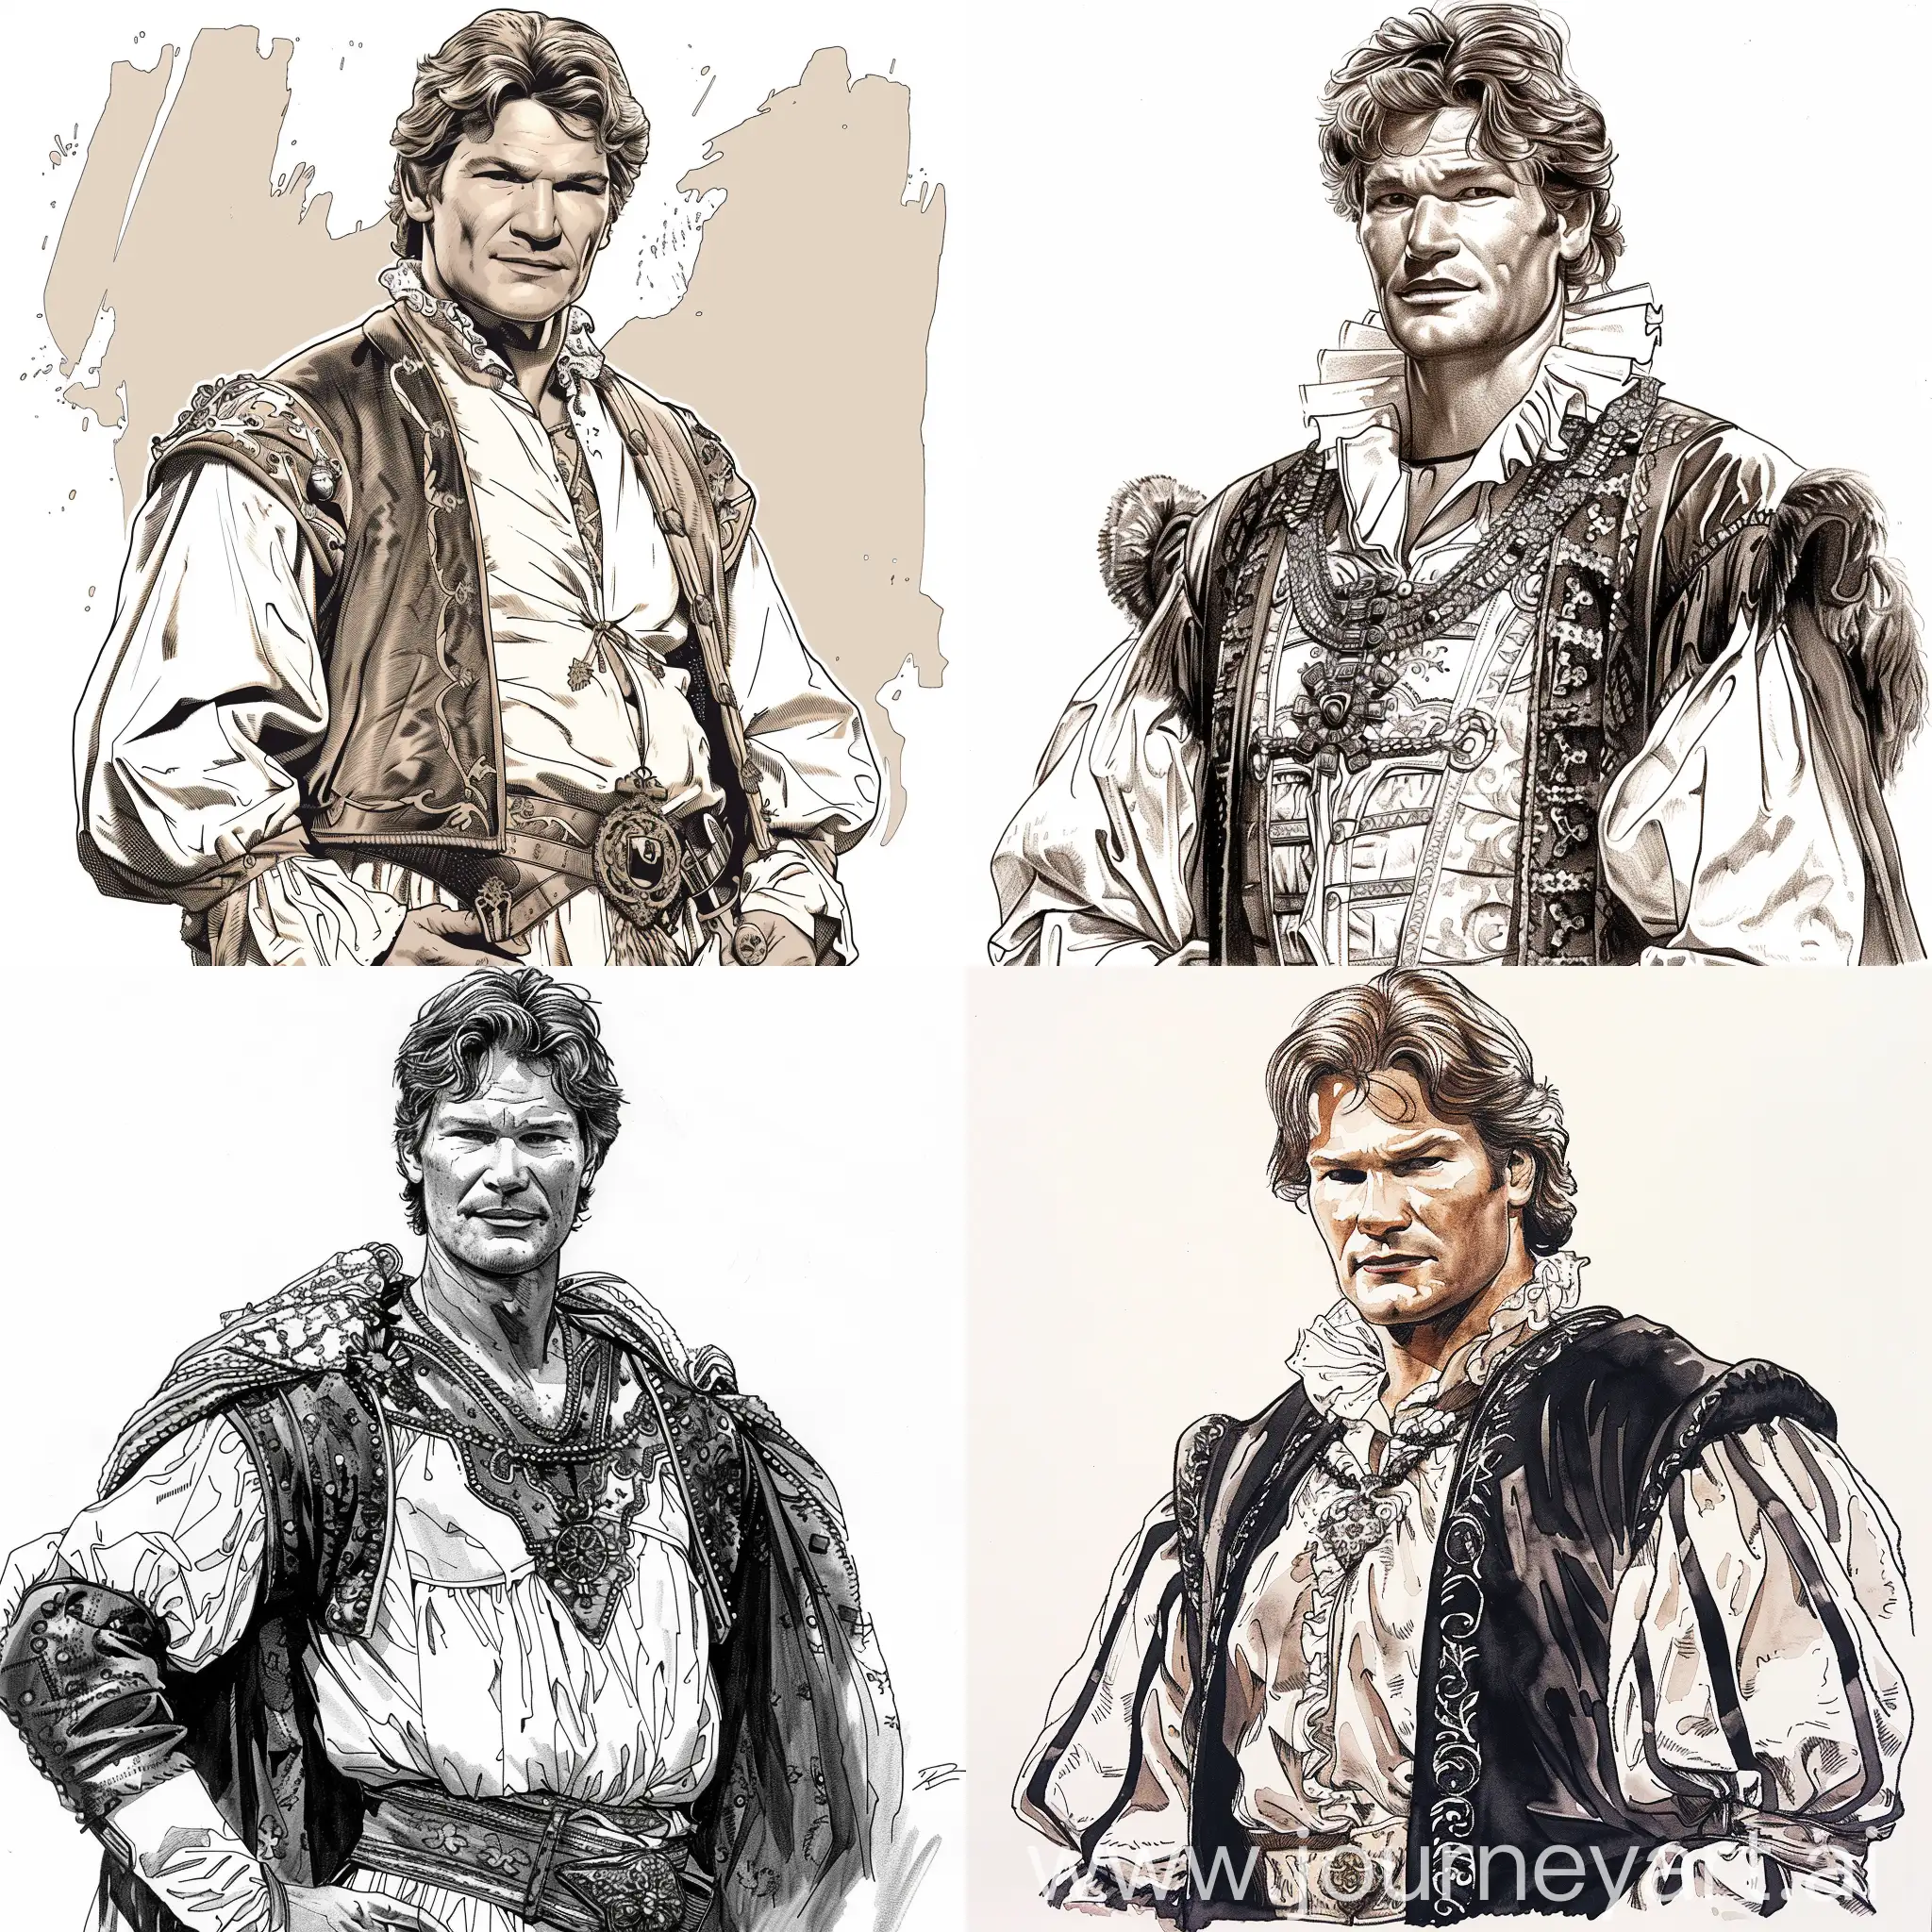 Medieval-King-of-Spain-Portrait-of-Actor-Patrick-Swayze-in-Royal-Attire